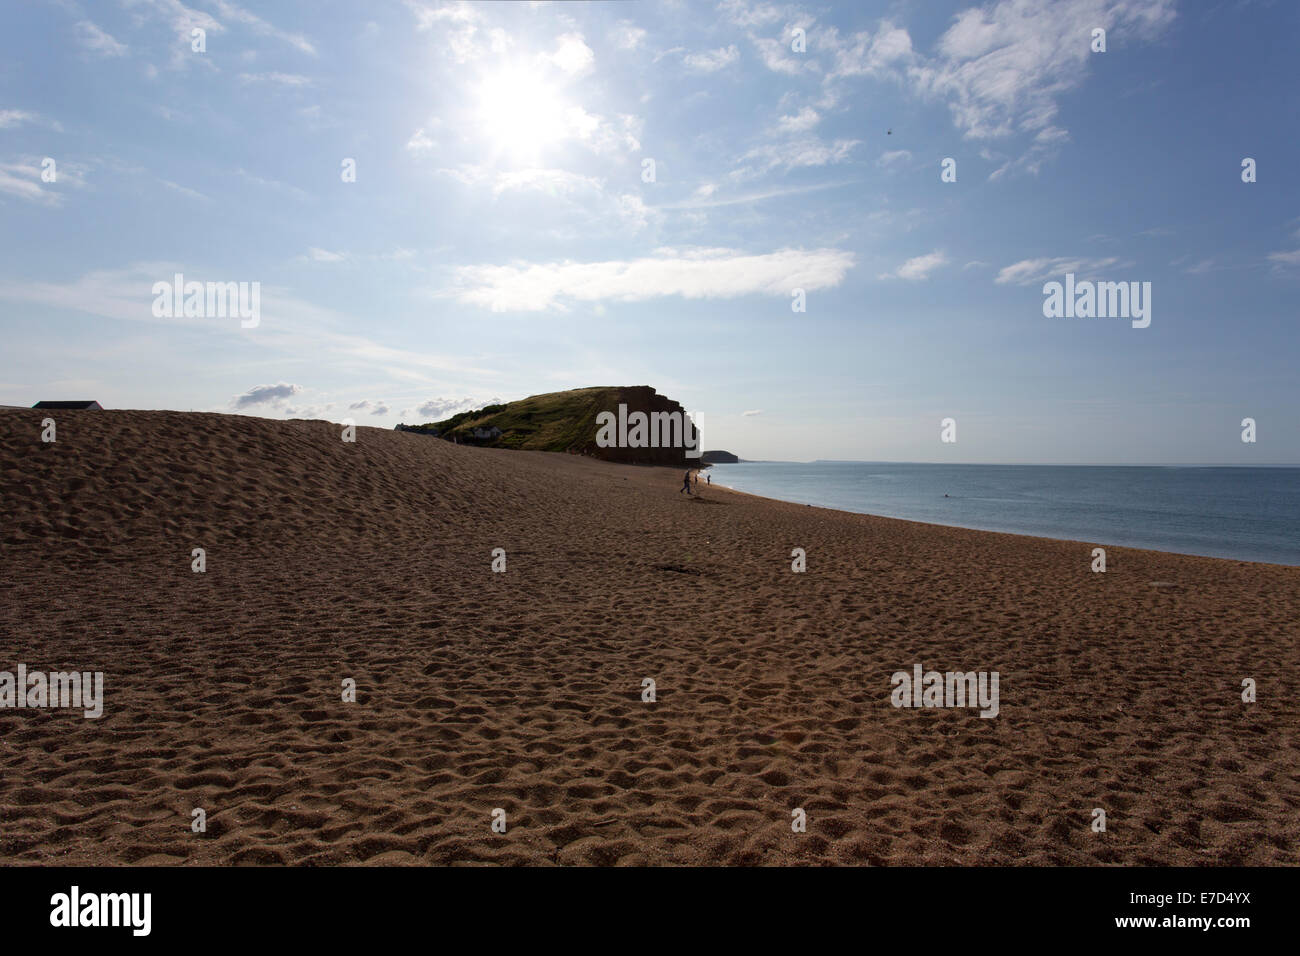 The seaside town of West Bay, near Bridport, Dorset, England, on a beautiful crisp sunny day with clear blue skies. Stock Photo